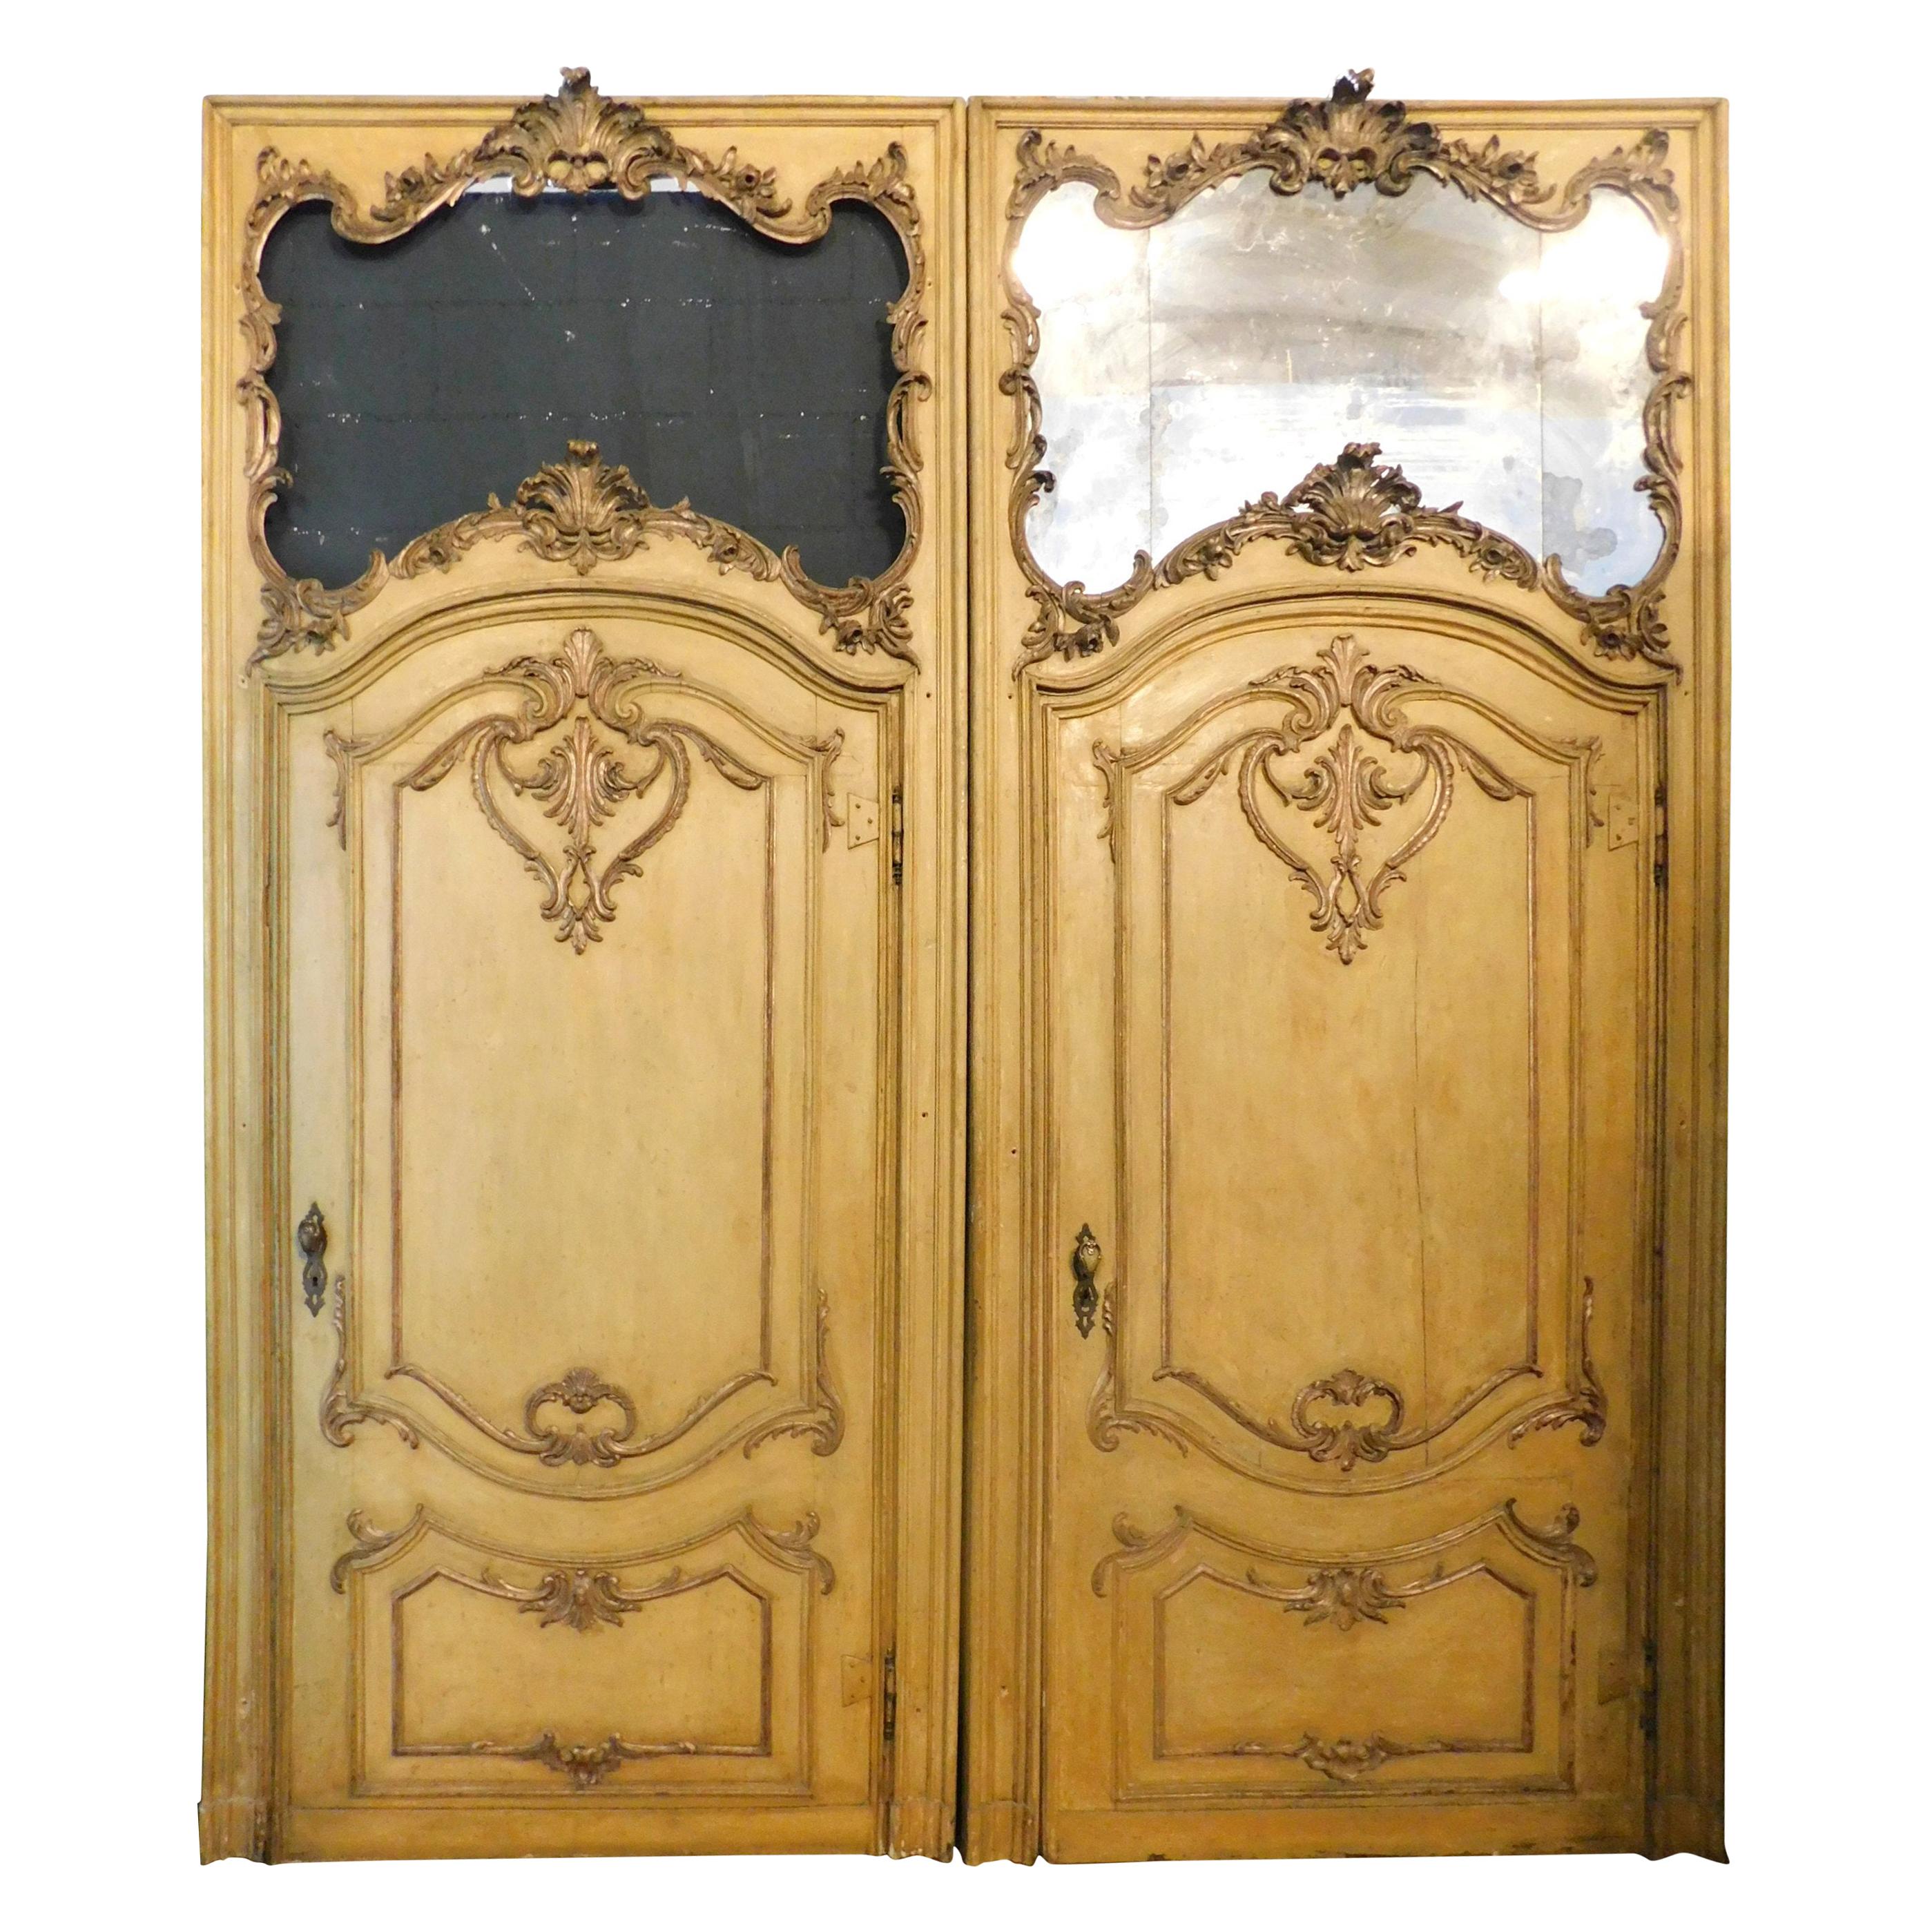 2 Antiques Baroque Doors Lacquered Yellow and Gilded, Mirror Updoor, 1700 Italy For Sale